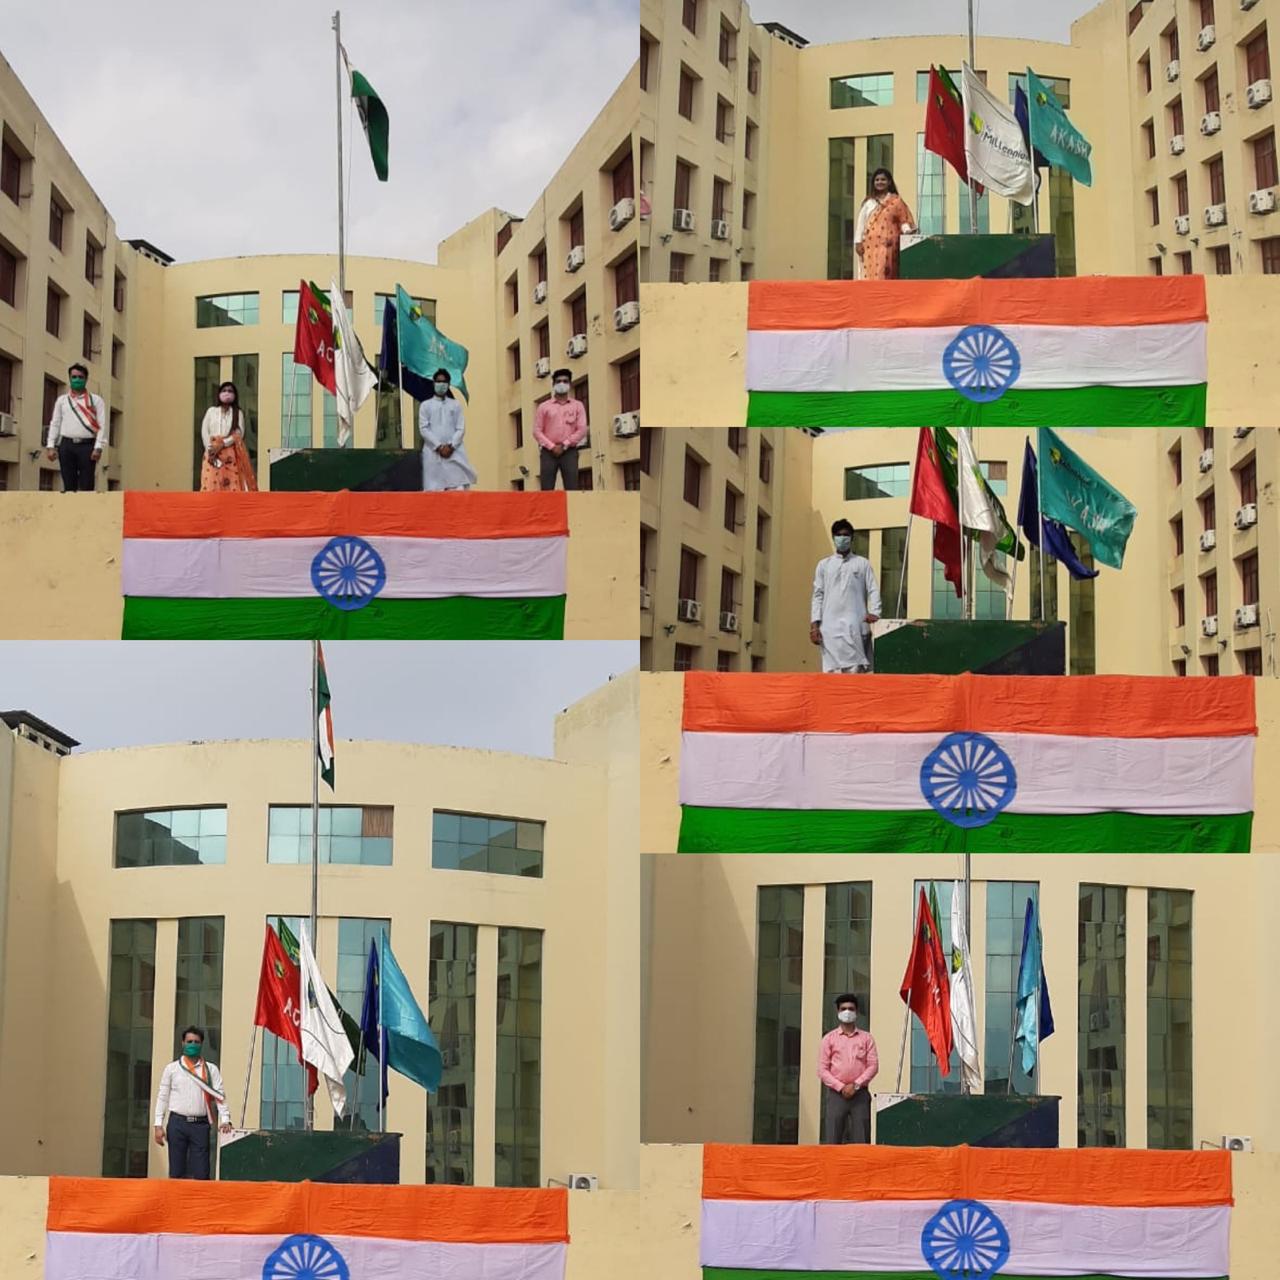 INDEPENDENCE DAY CELEBRATIONS 2020 